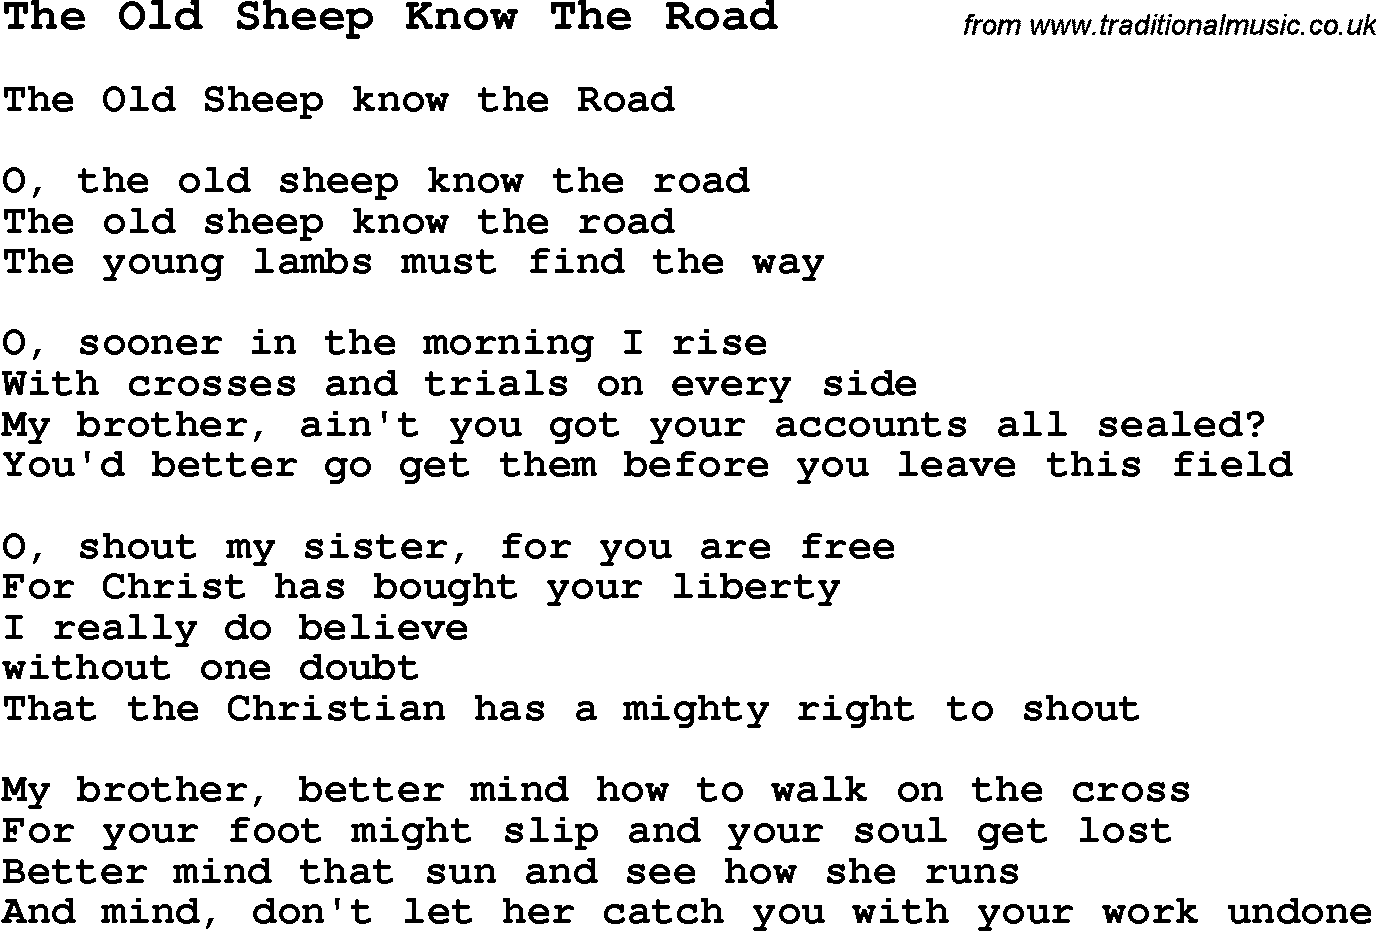 Negro Spiritual Song Lyrics for The Old Sheep Know The Road